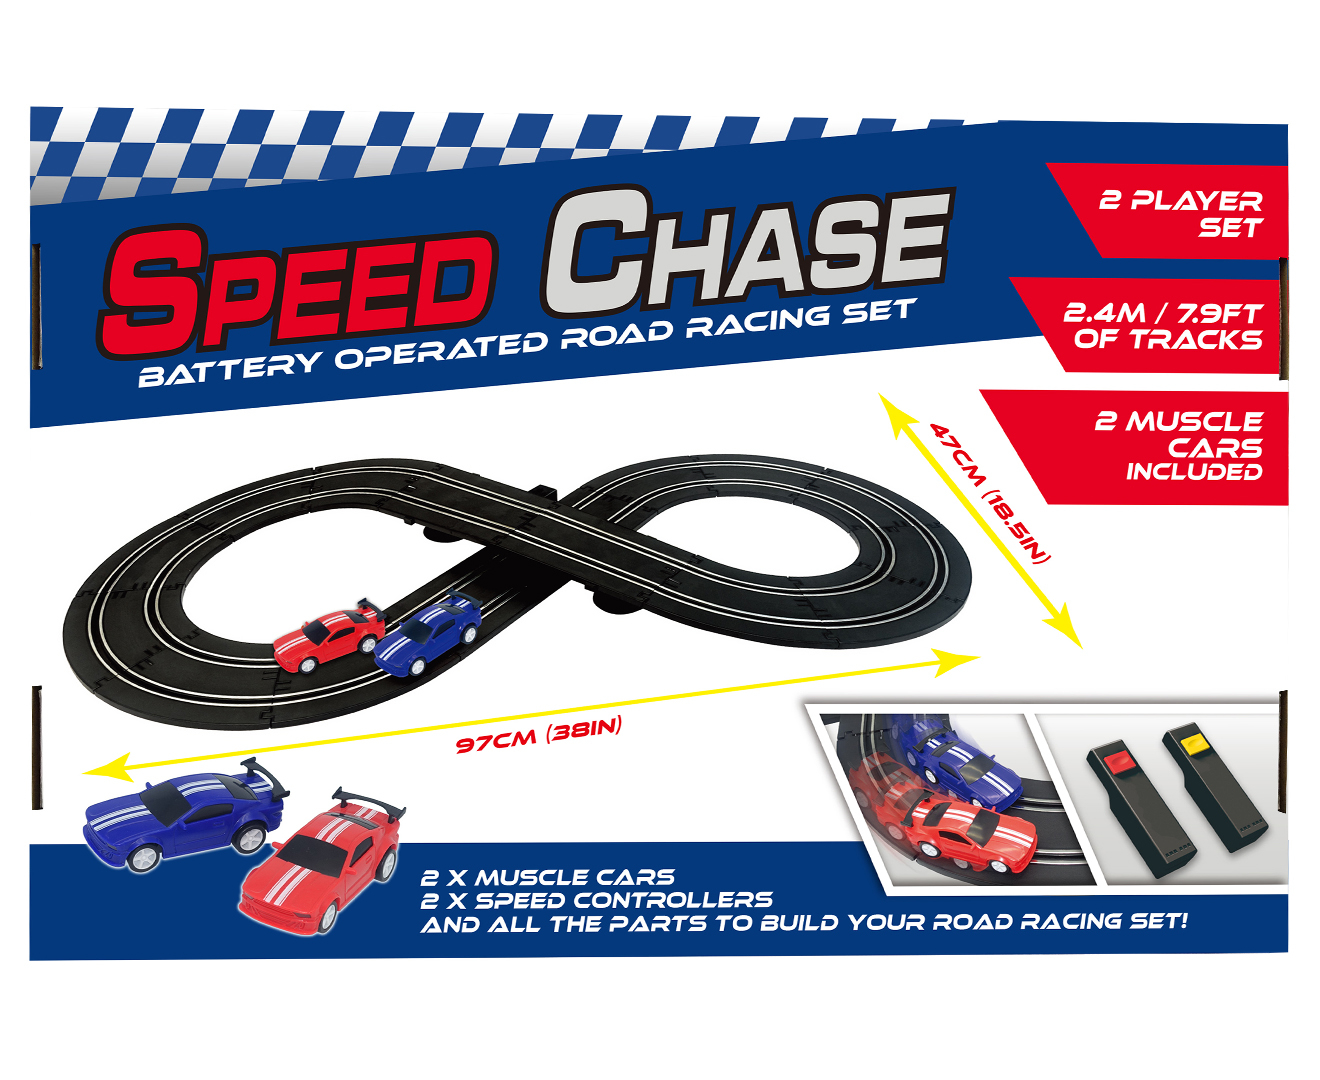 speed chase battery operated road racing set